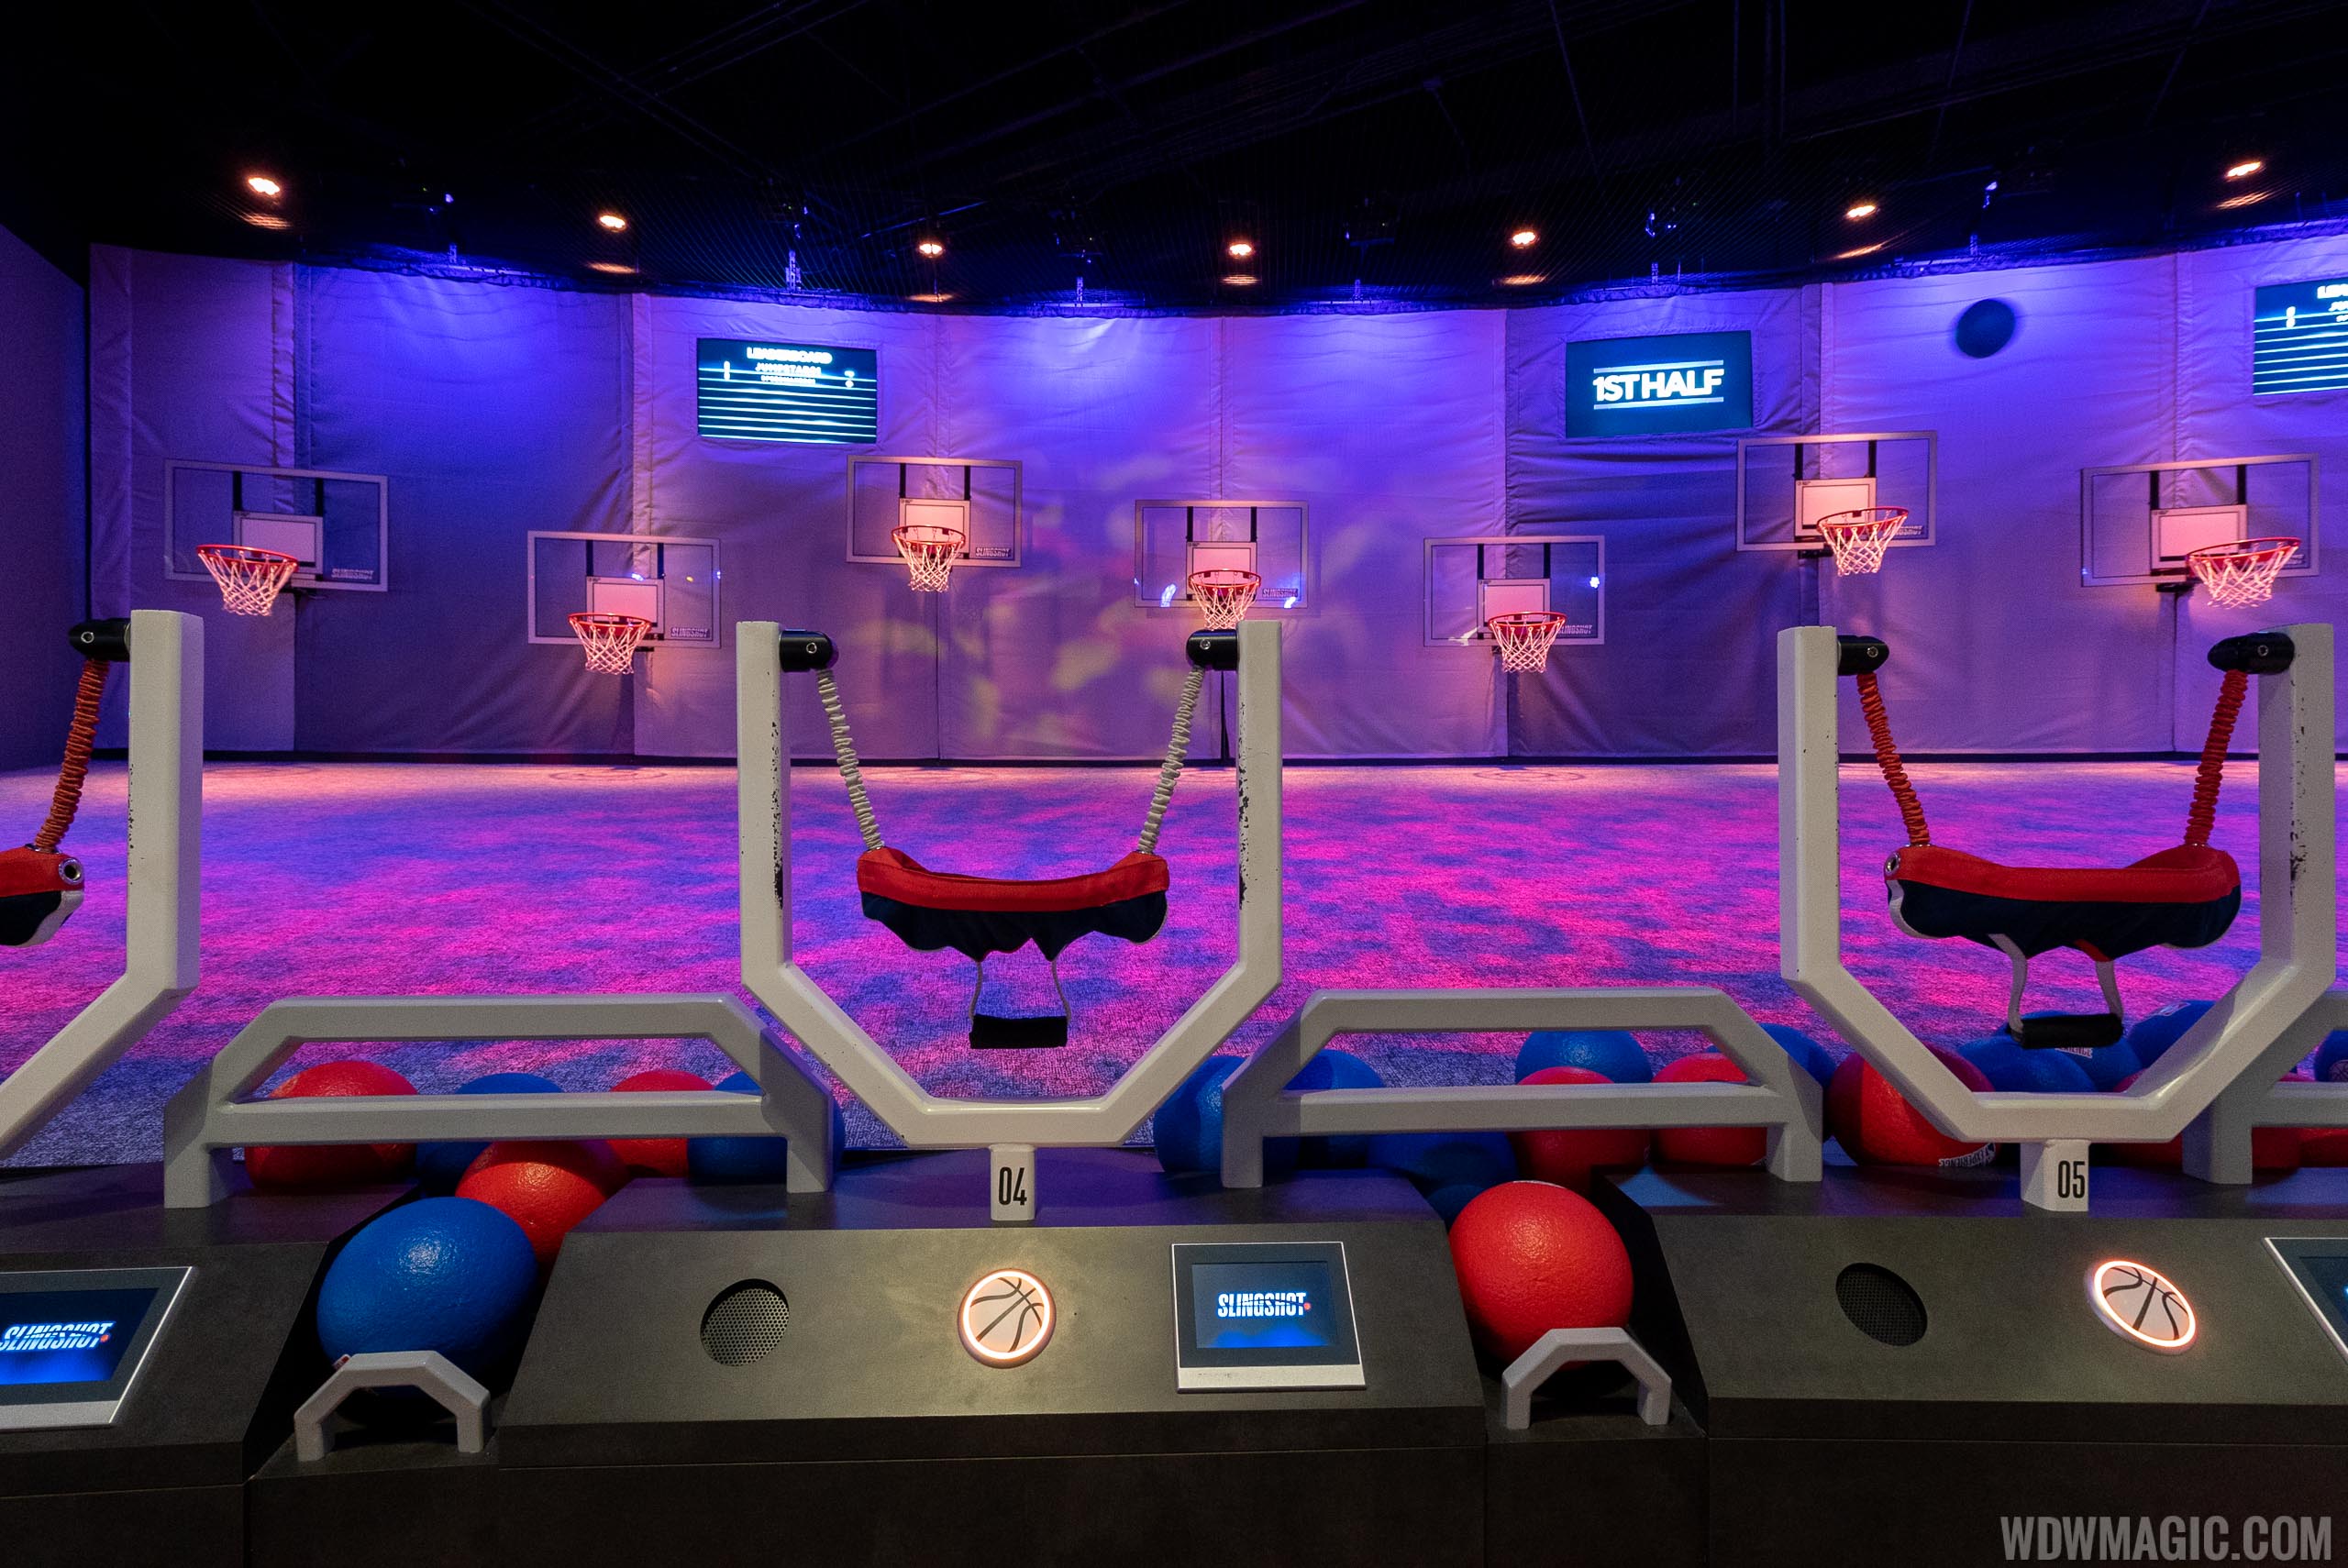 Tour of The NBA Experience at Disney Springs - Photo 19 of 20